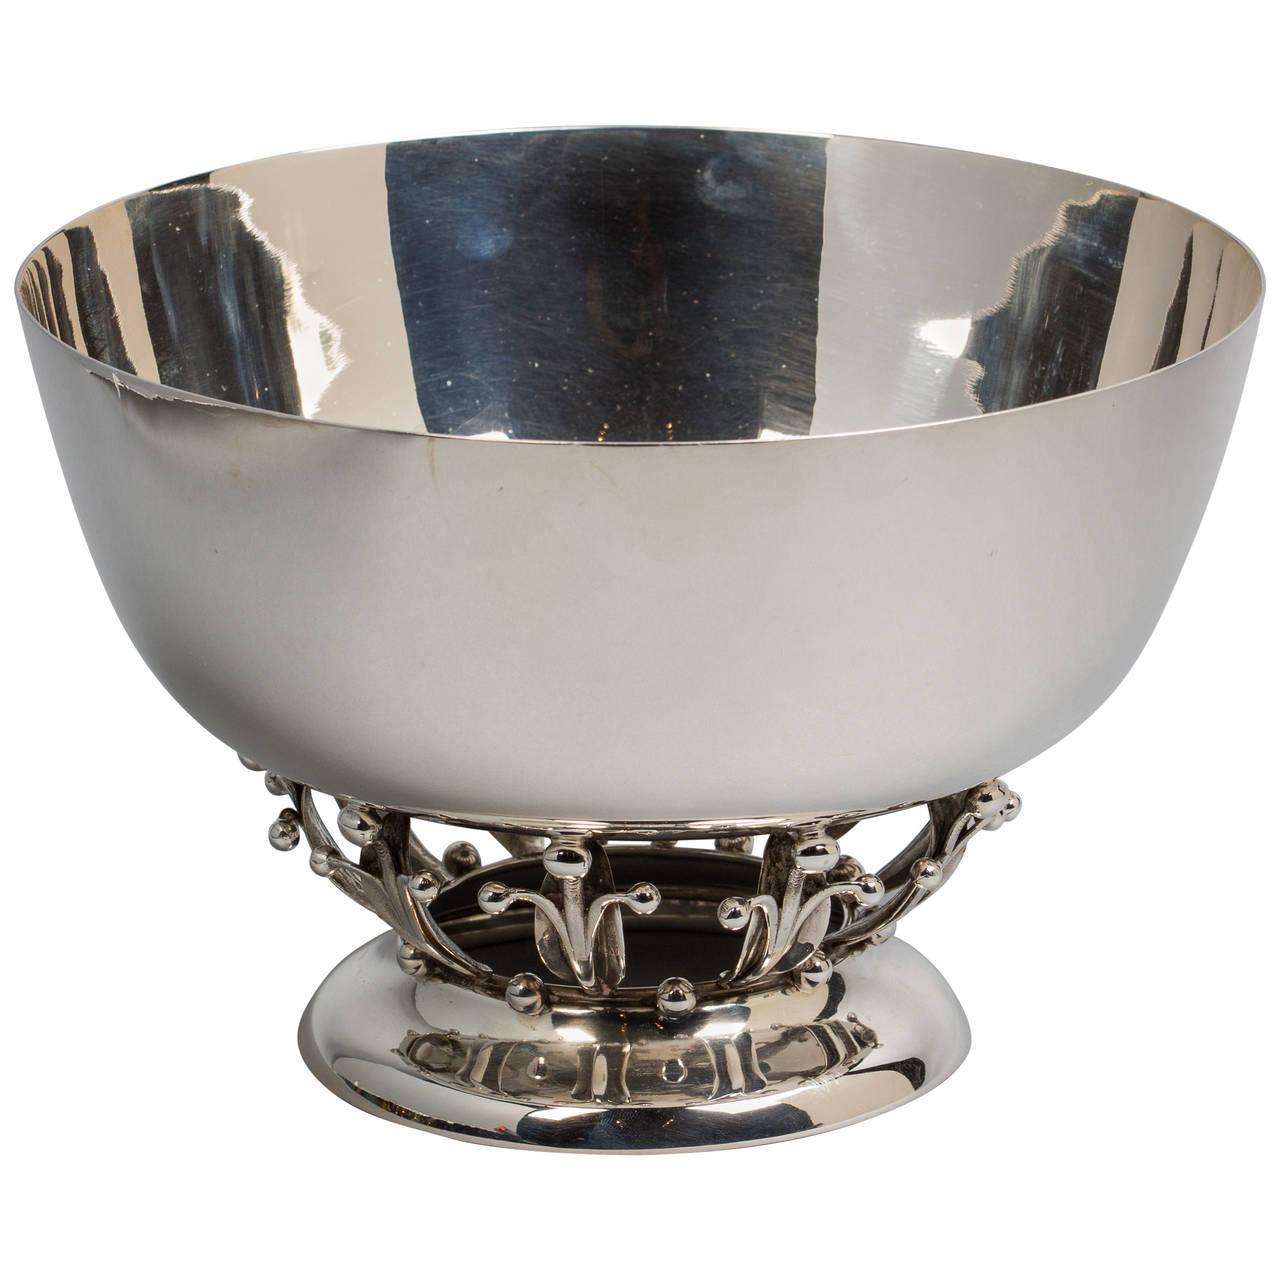 Early 20th Century Sterling Silver Bowl, Woodside Sterling Company, New York, circa 1920